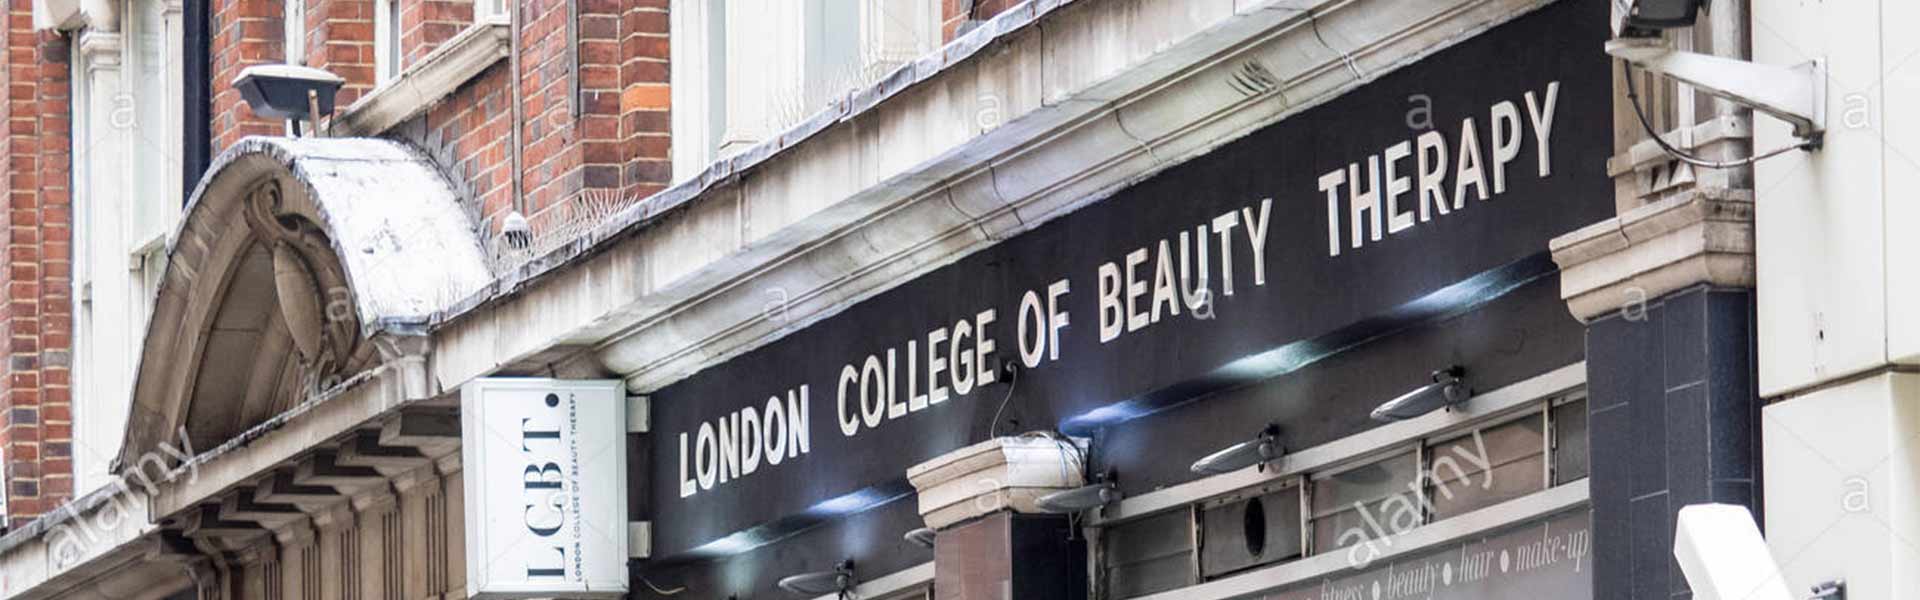 London College of Beauty Therapy - Compare the Course